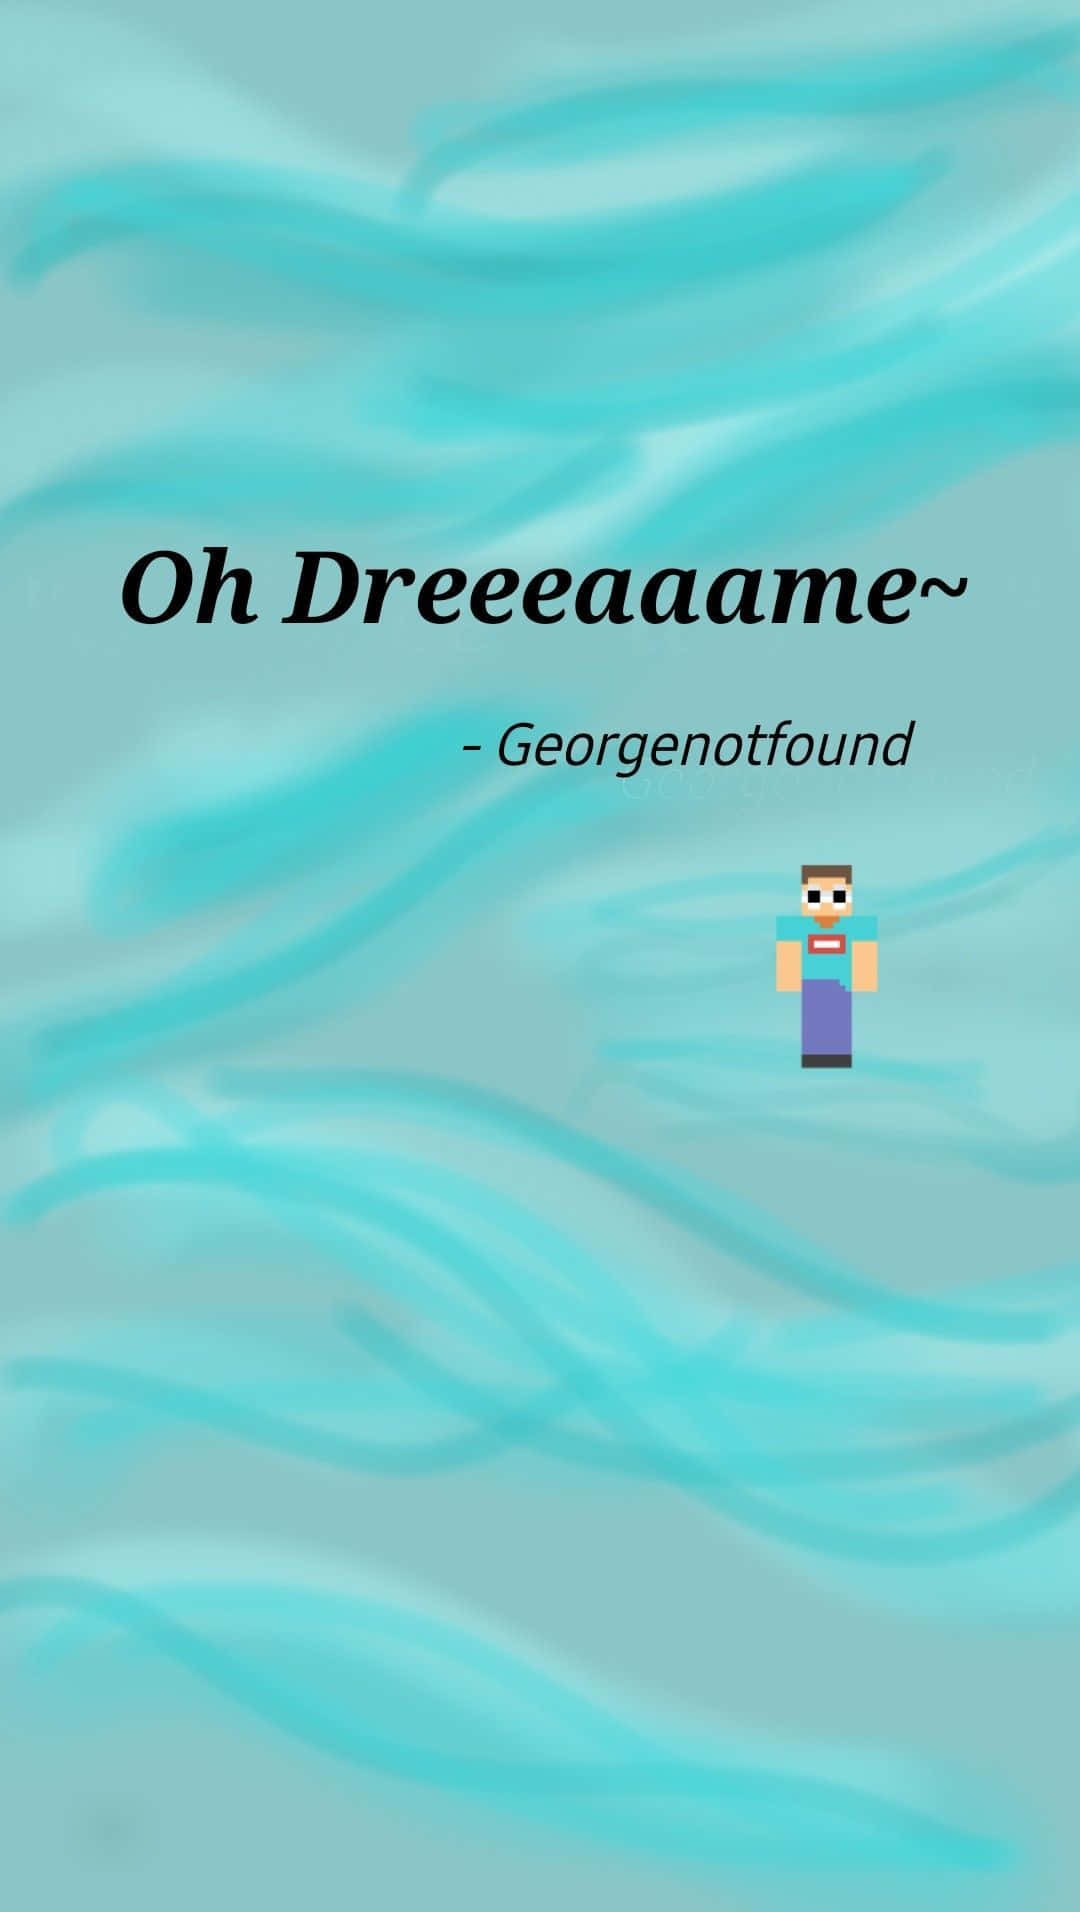 Georgenotfound Quotes Saying Oh Dreame Wallpaper